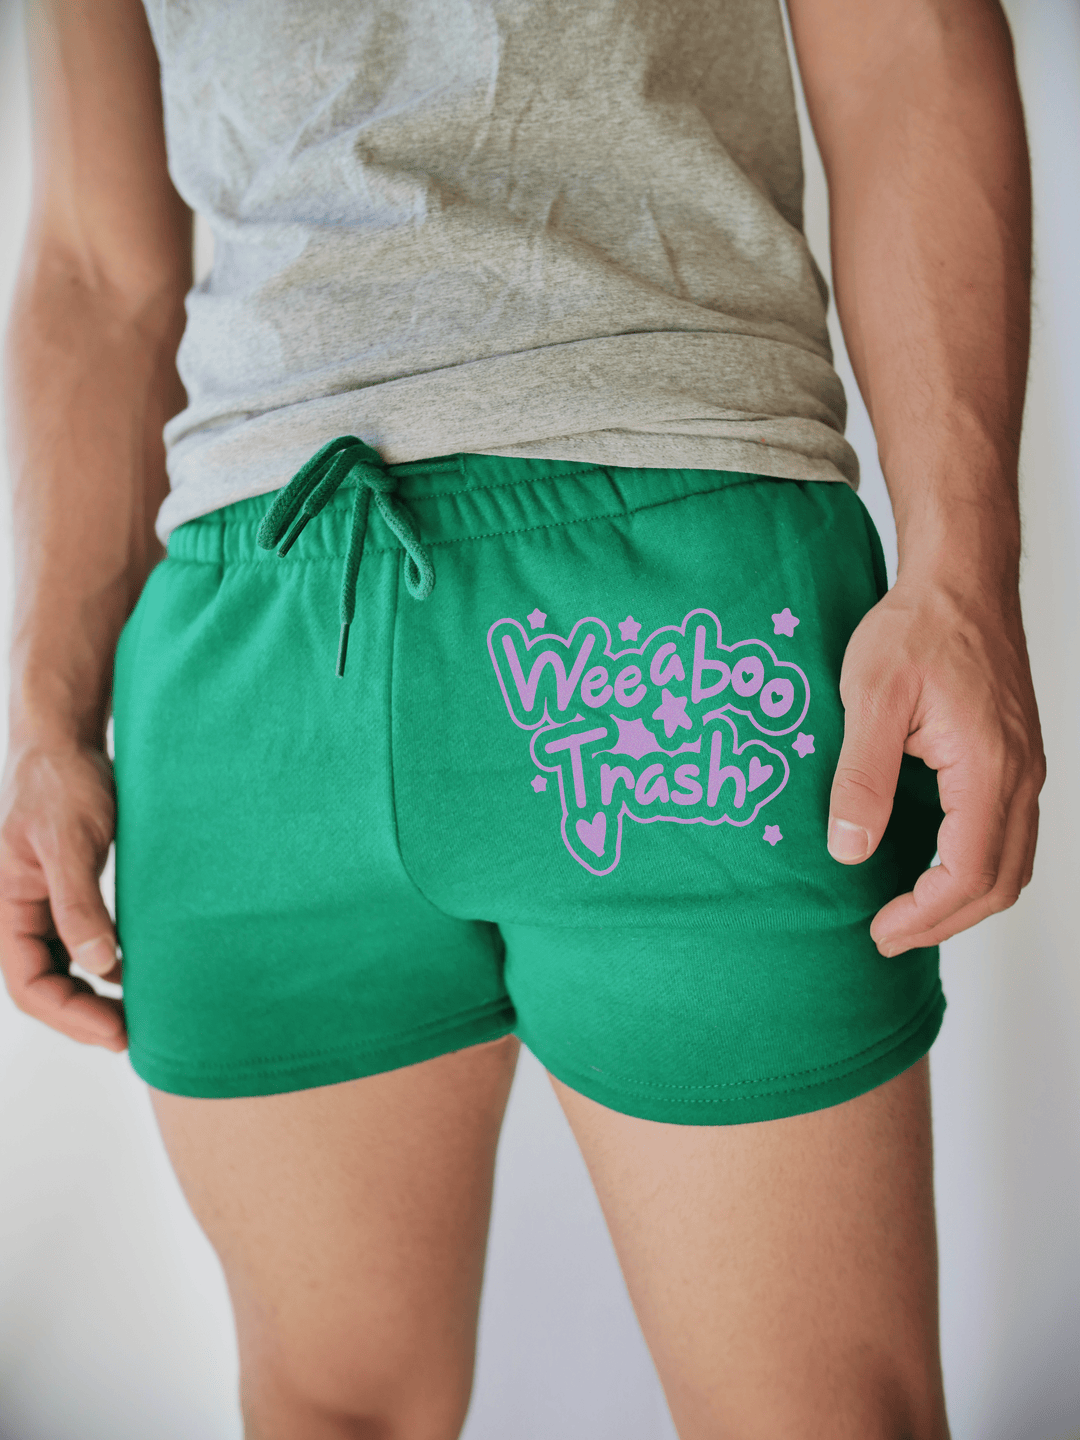 PixelThat Punderwear Shorts Kelly Green / S / Front Weeaboo Trash Men's Gym Shorts